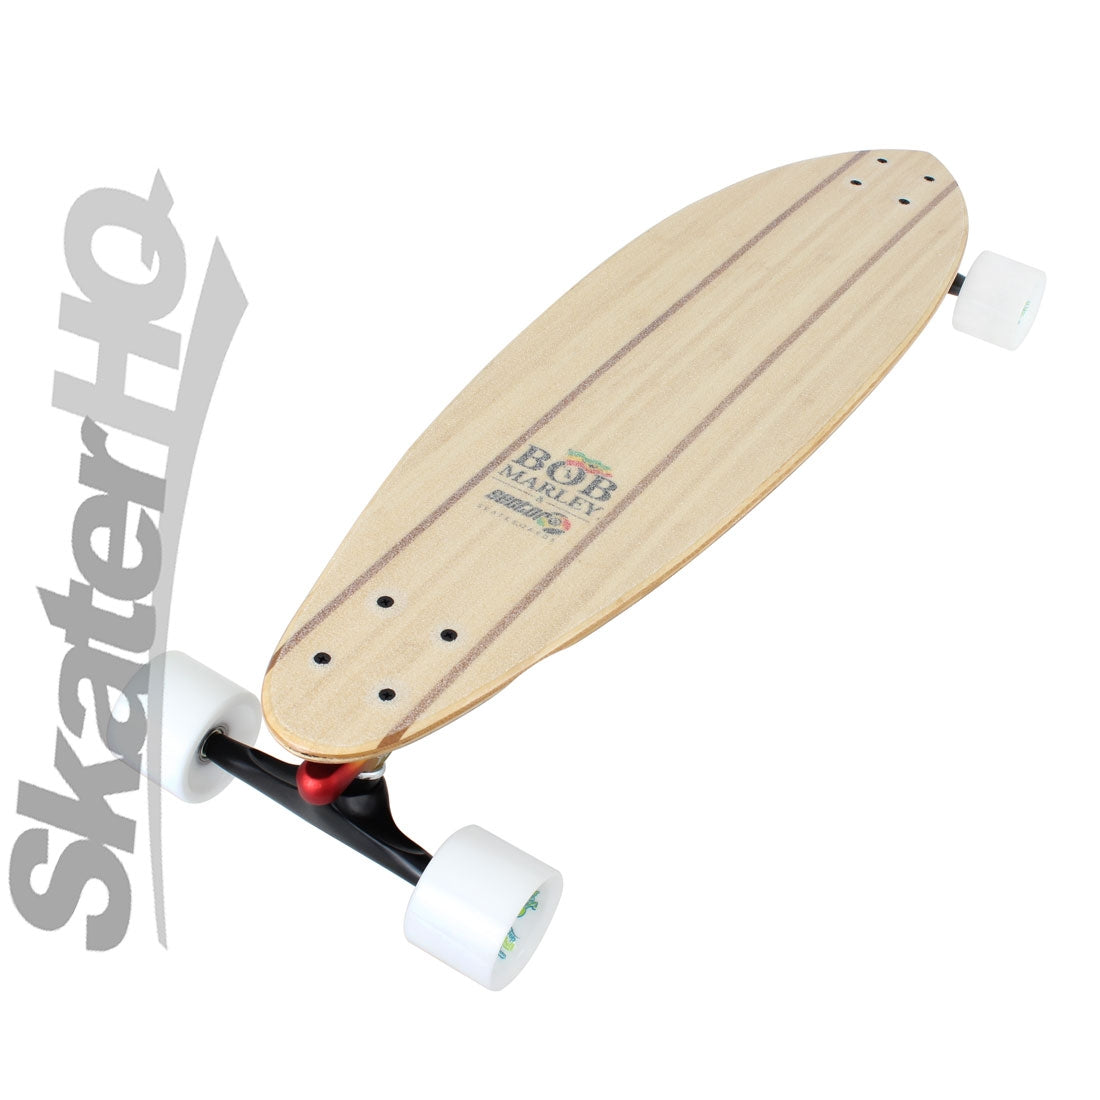 Sector 9 Small Axe Bamboo Longboard Complete Skateboard Completes Longboards